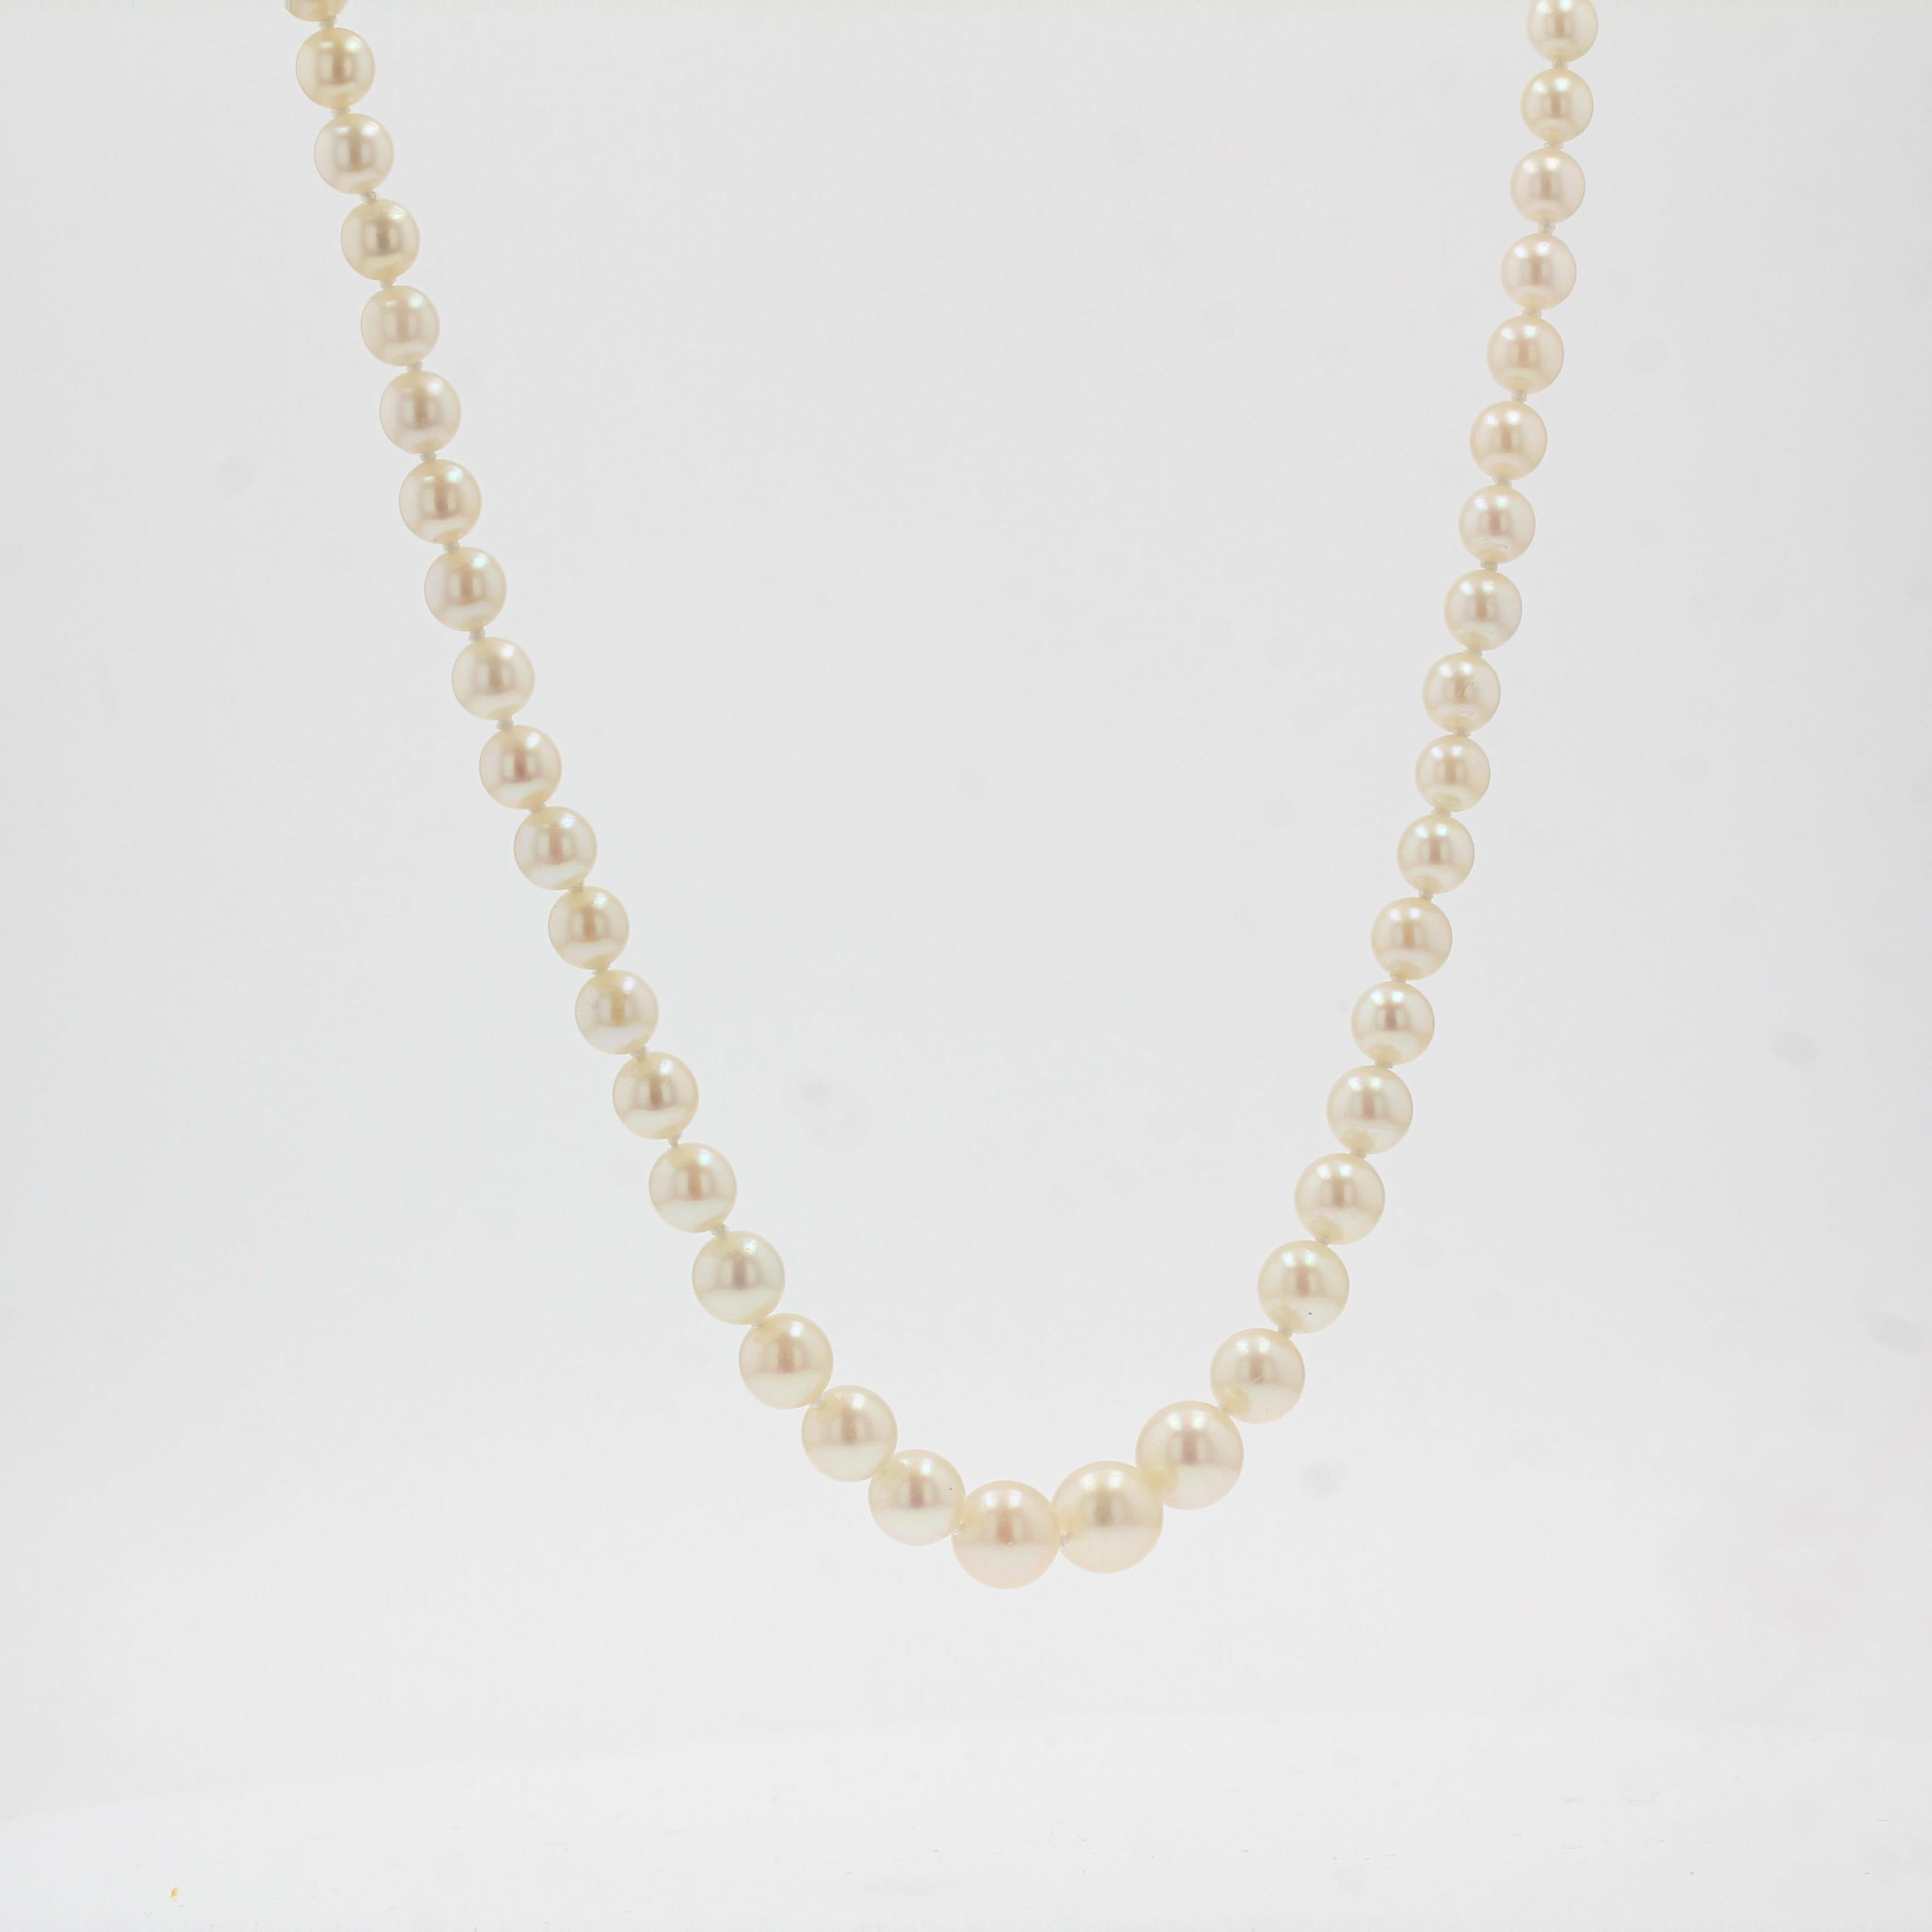 value of 50 year old pearl necklace uk